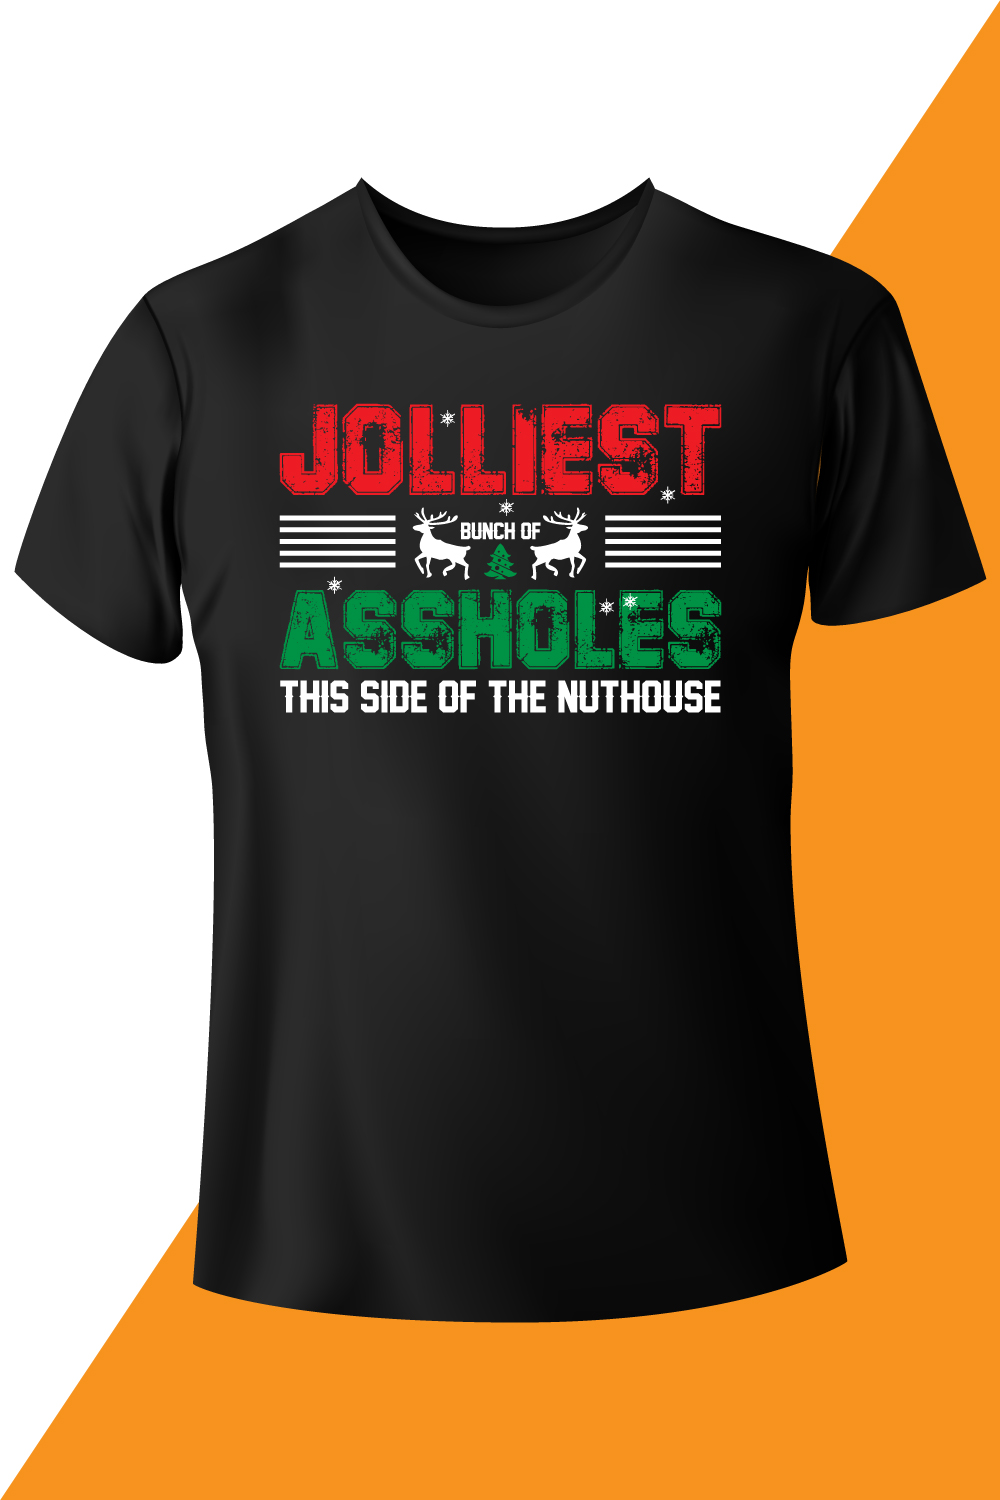 Image of a black T-shirt with a beautiful inscription jolliest bunch of assholes this side of the Nuthouse.